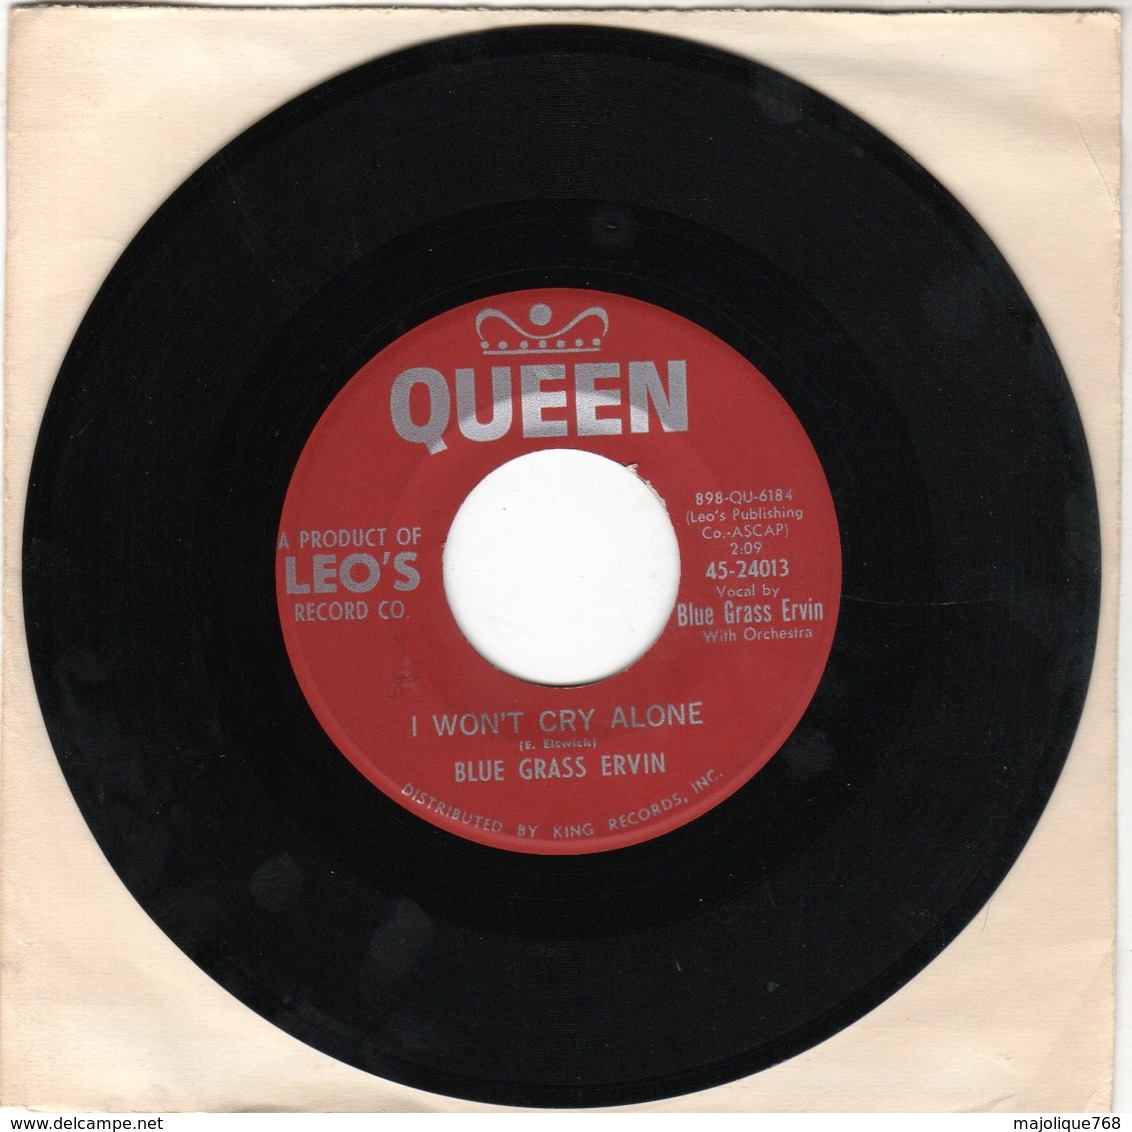 Blue Grass Ervin - Misery - I Won't Cry Alone - Queen 45-24013 - 1962 - - Country En Folk